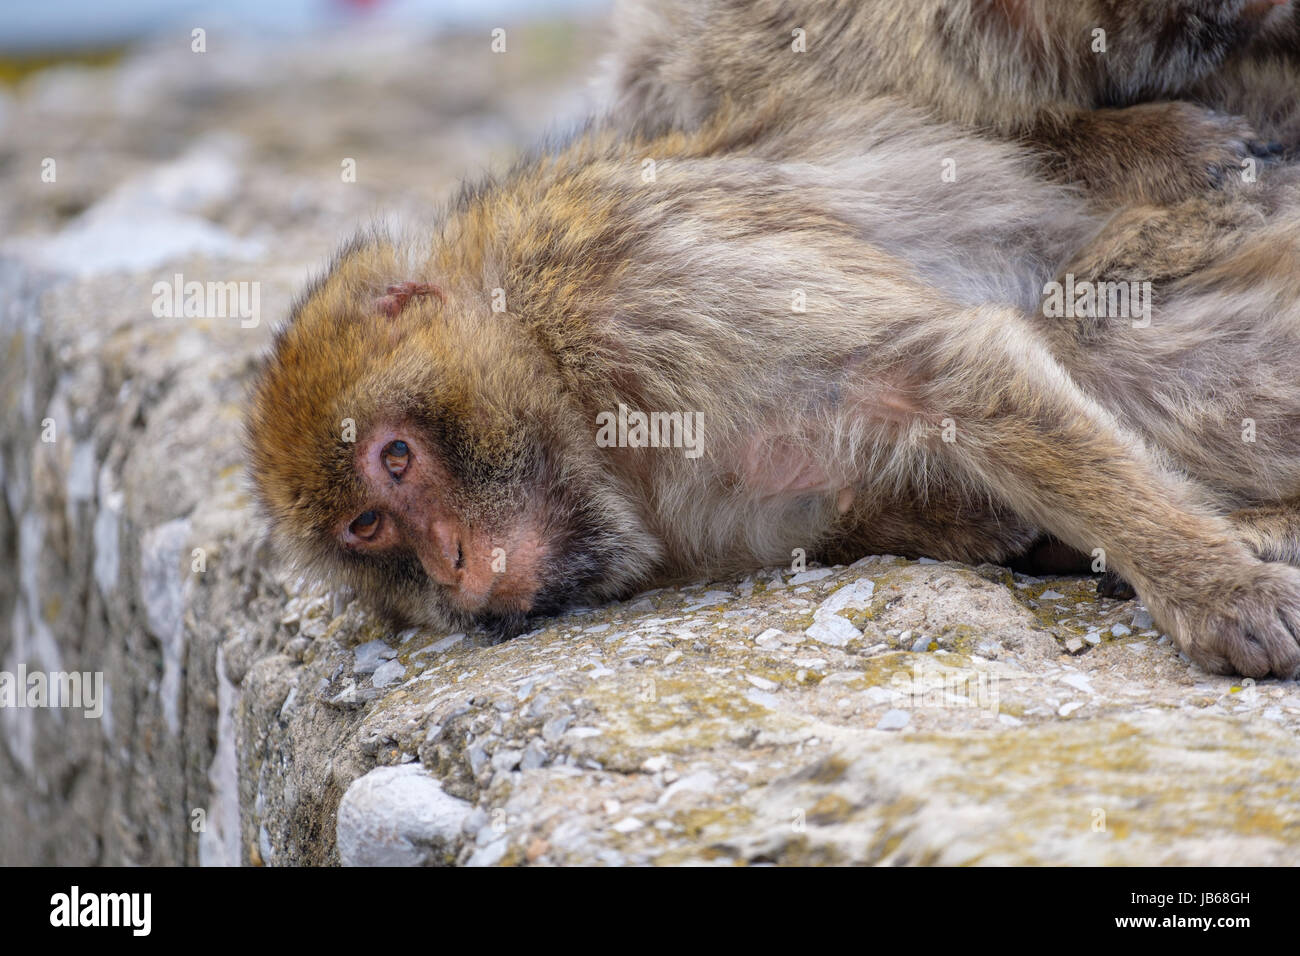 Sleepy Barbary Macaque on a wall looking into the camera. Stock Photo